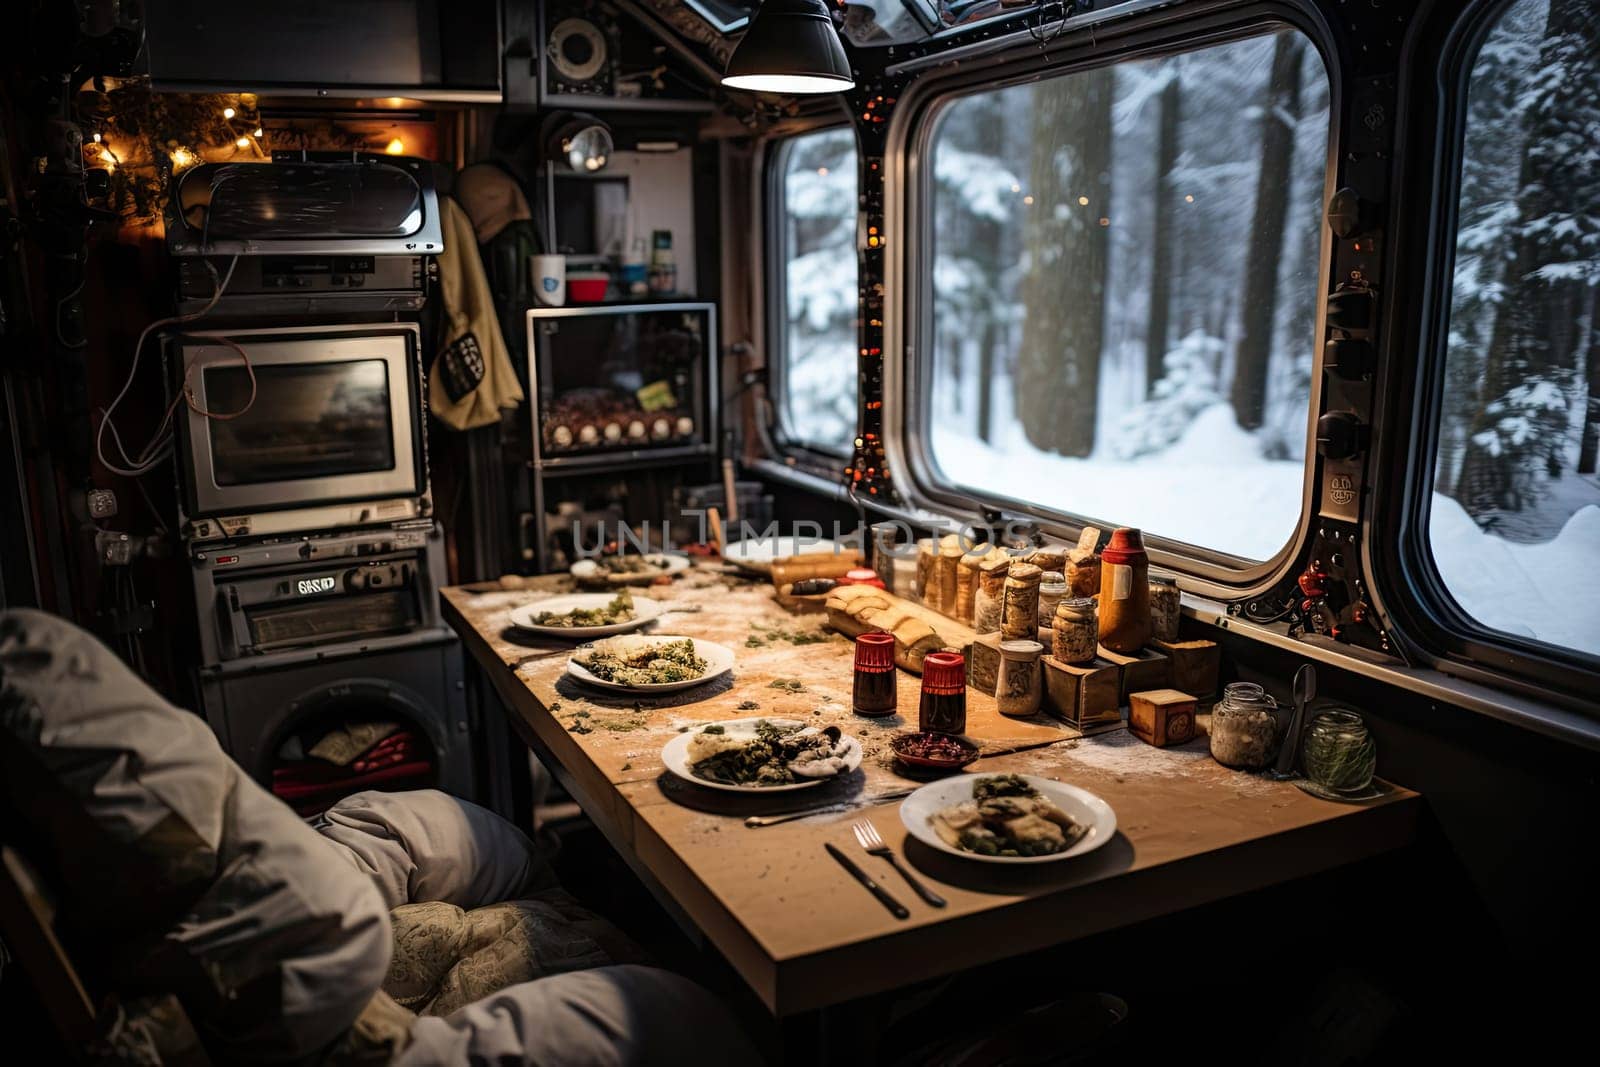 A Delicious Feast on the Road: A Table Set with Mouthwatering Food in a Camper